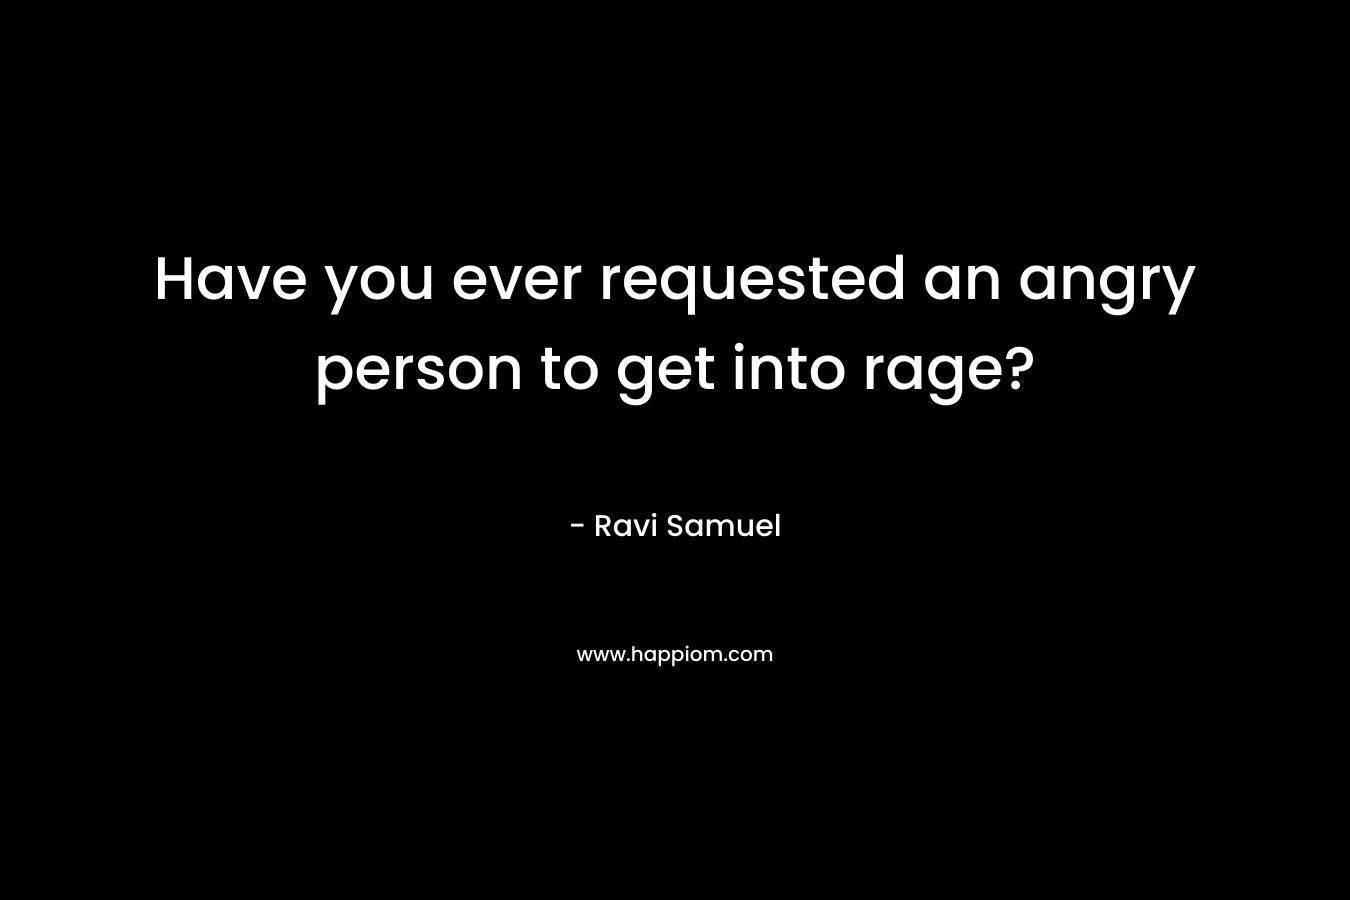 Have you ever requested an angry person to get into rage? – Ravi Samuel